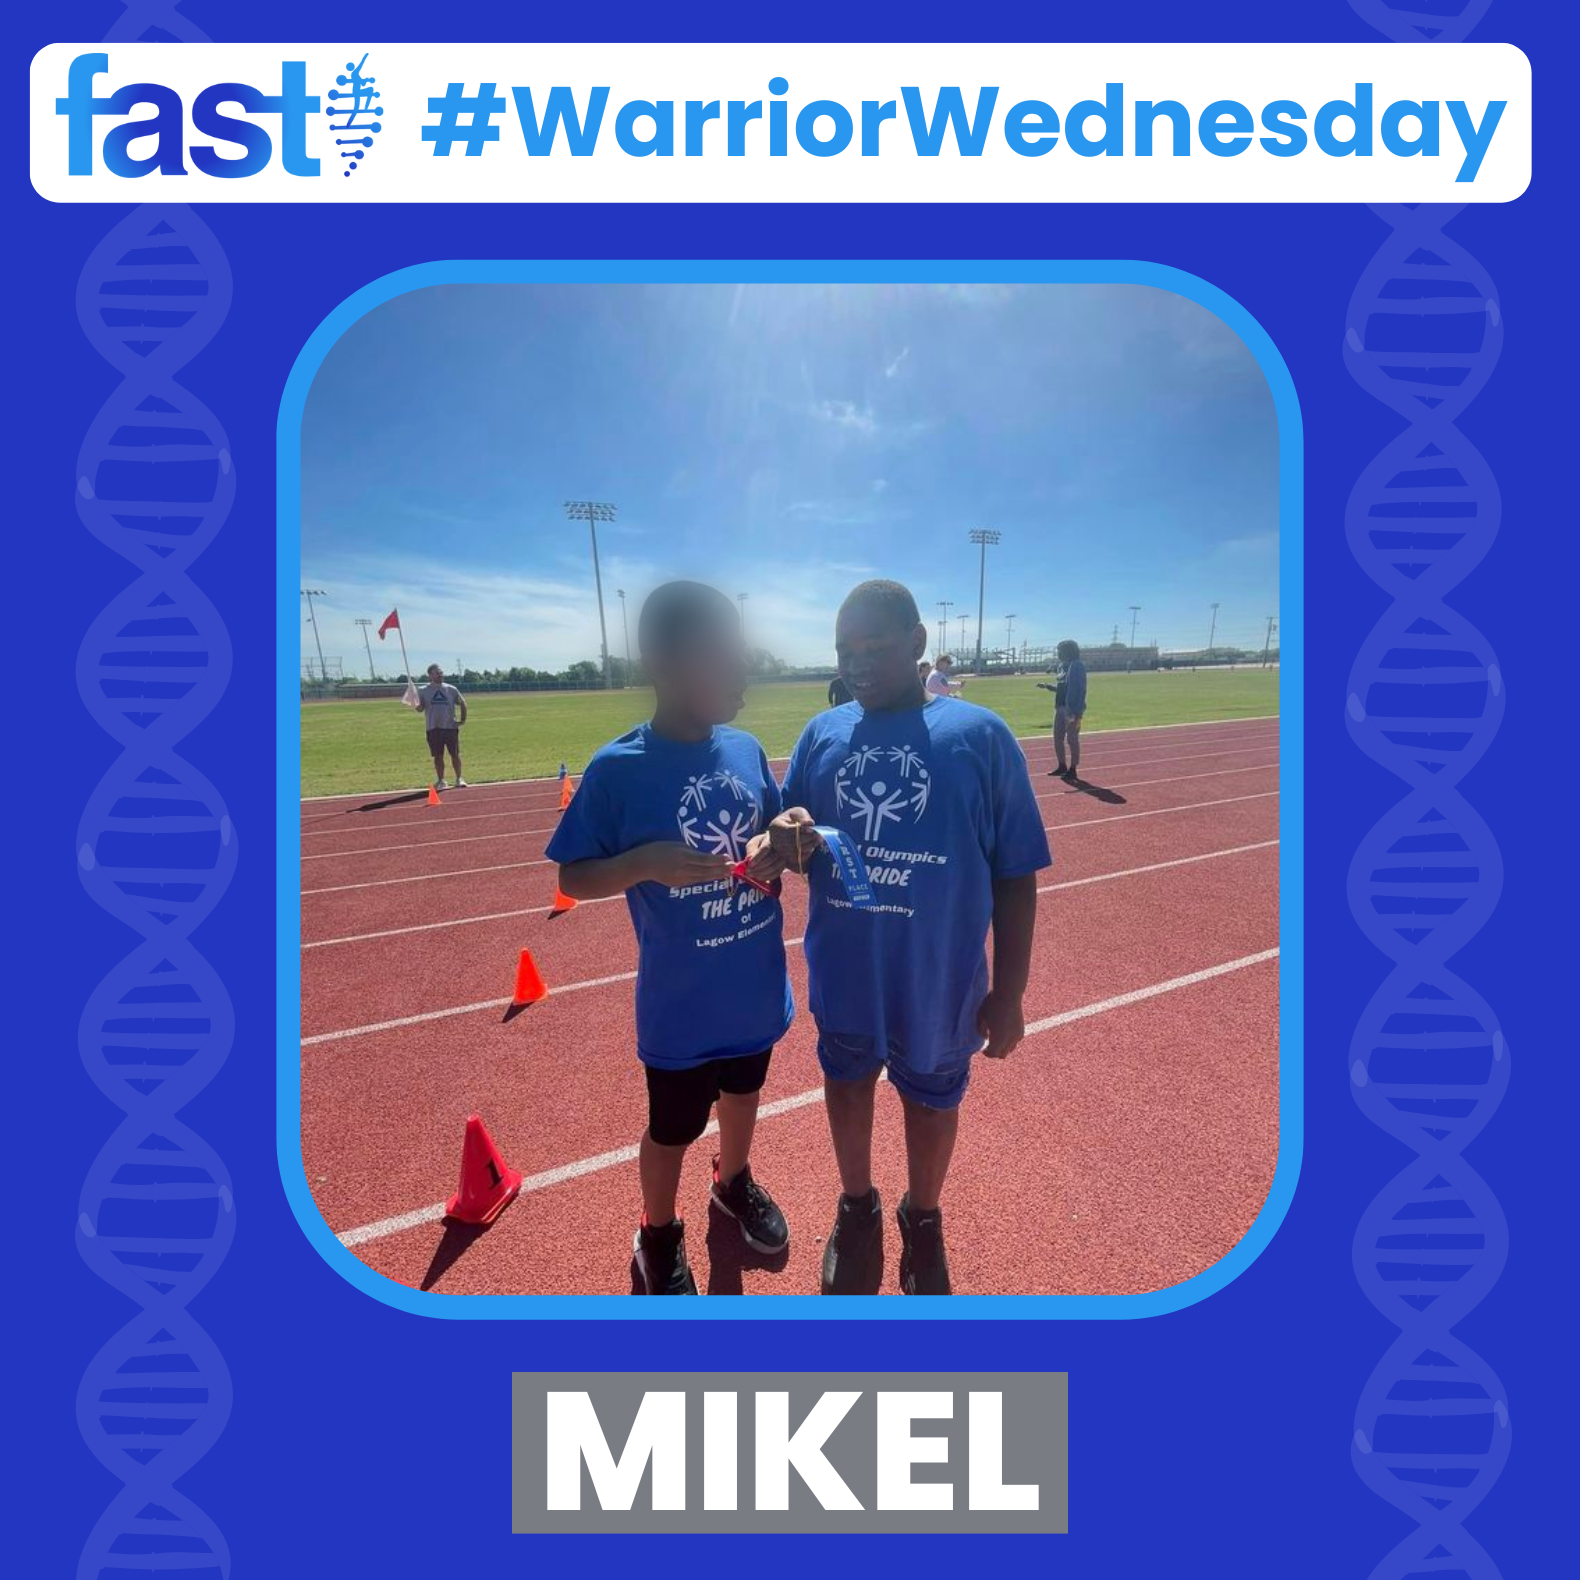 FAST Warrior Wednesday - Mikel, with a photo of Mikel and another boy on a running track